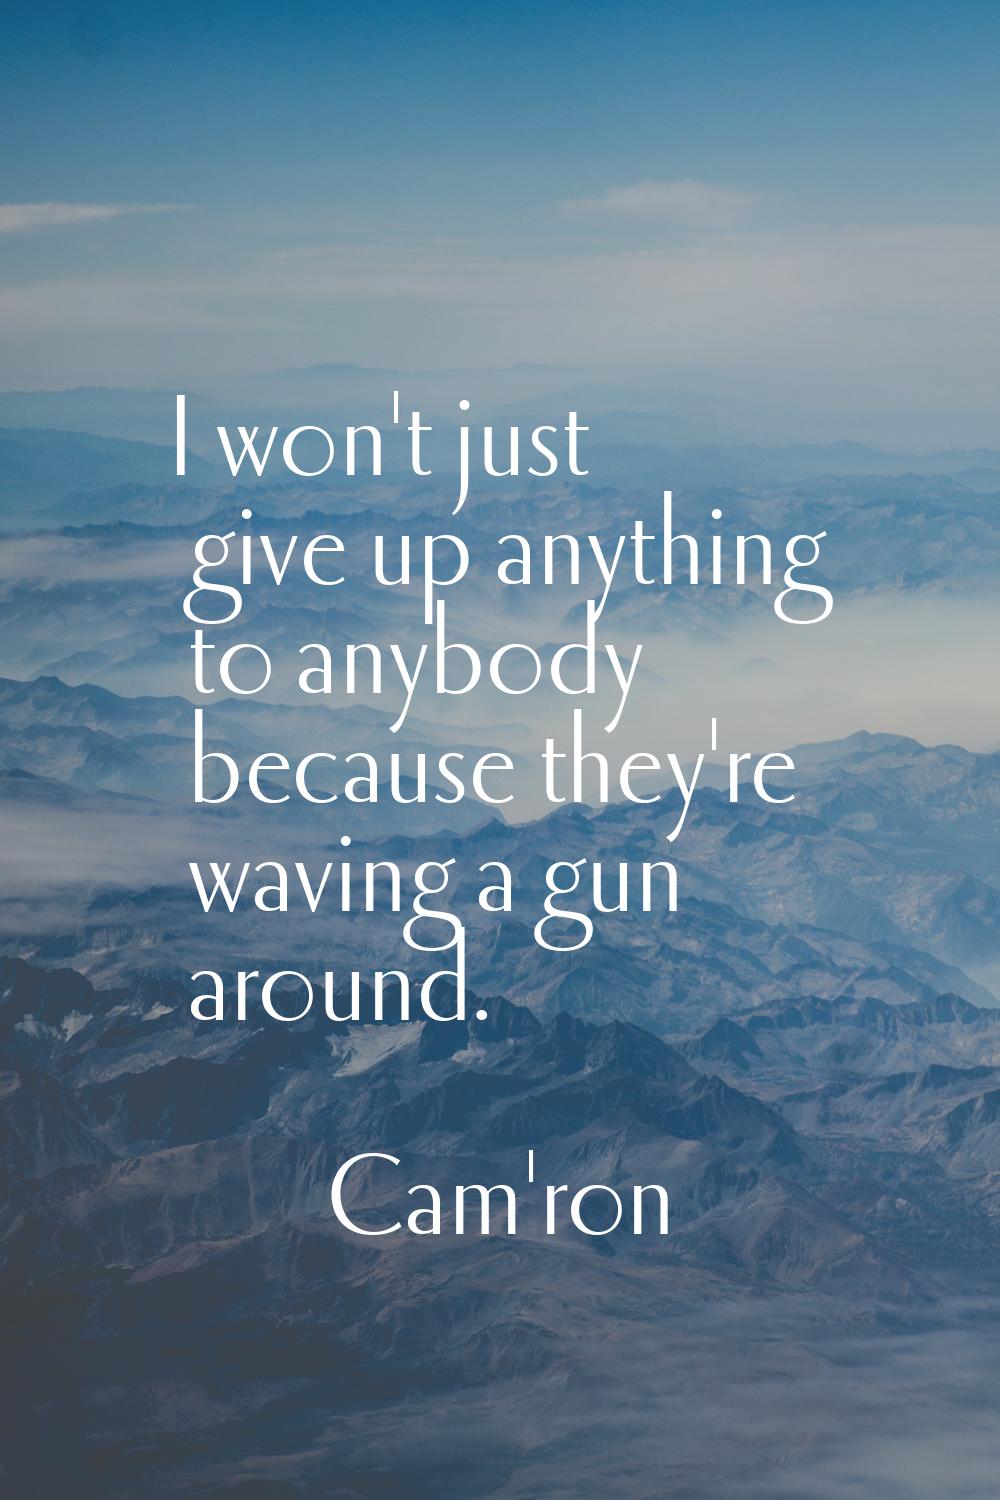 I won't just give up anything to anybody because they're waving a gun around.